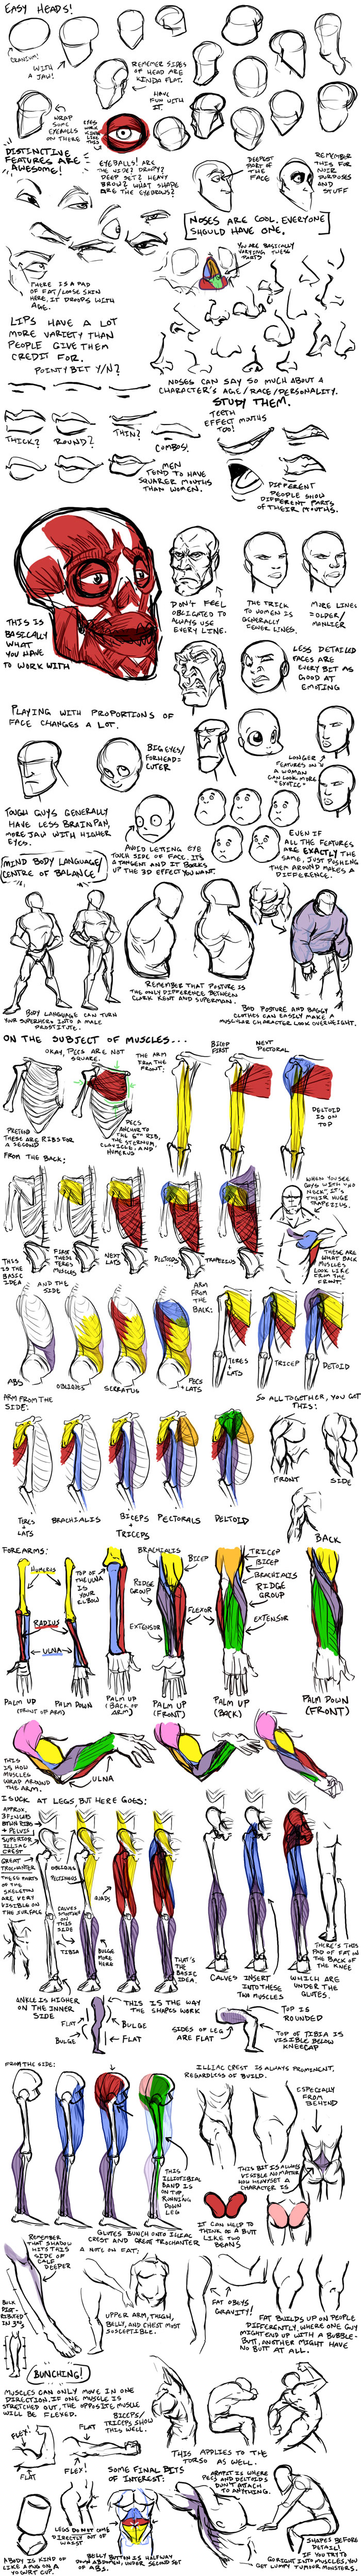 Clear steps on how to draw human muscles